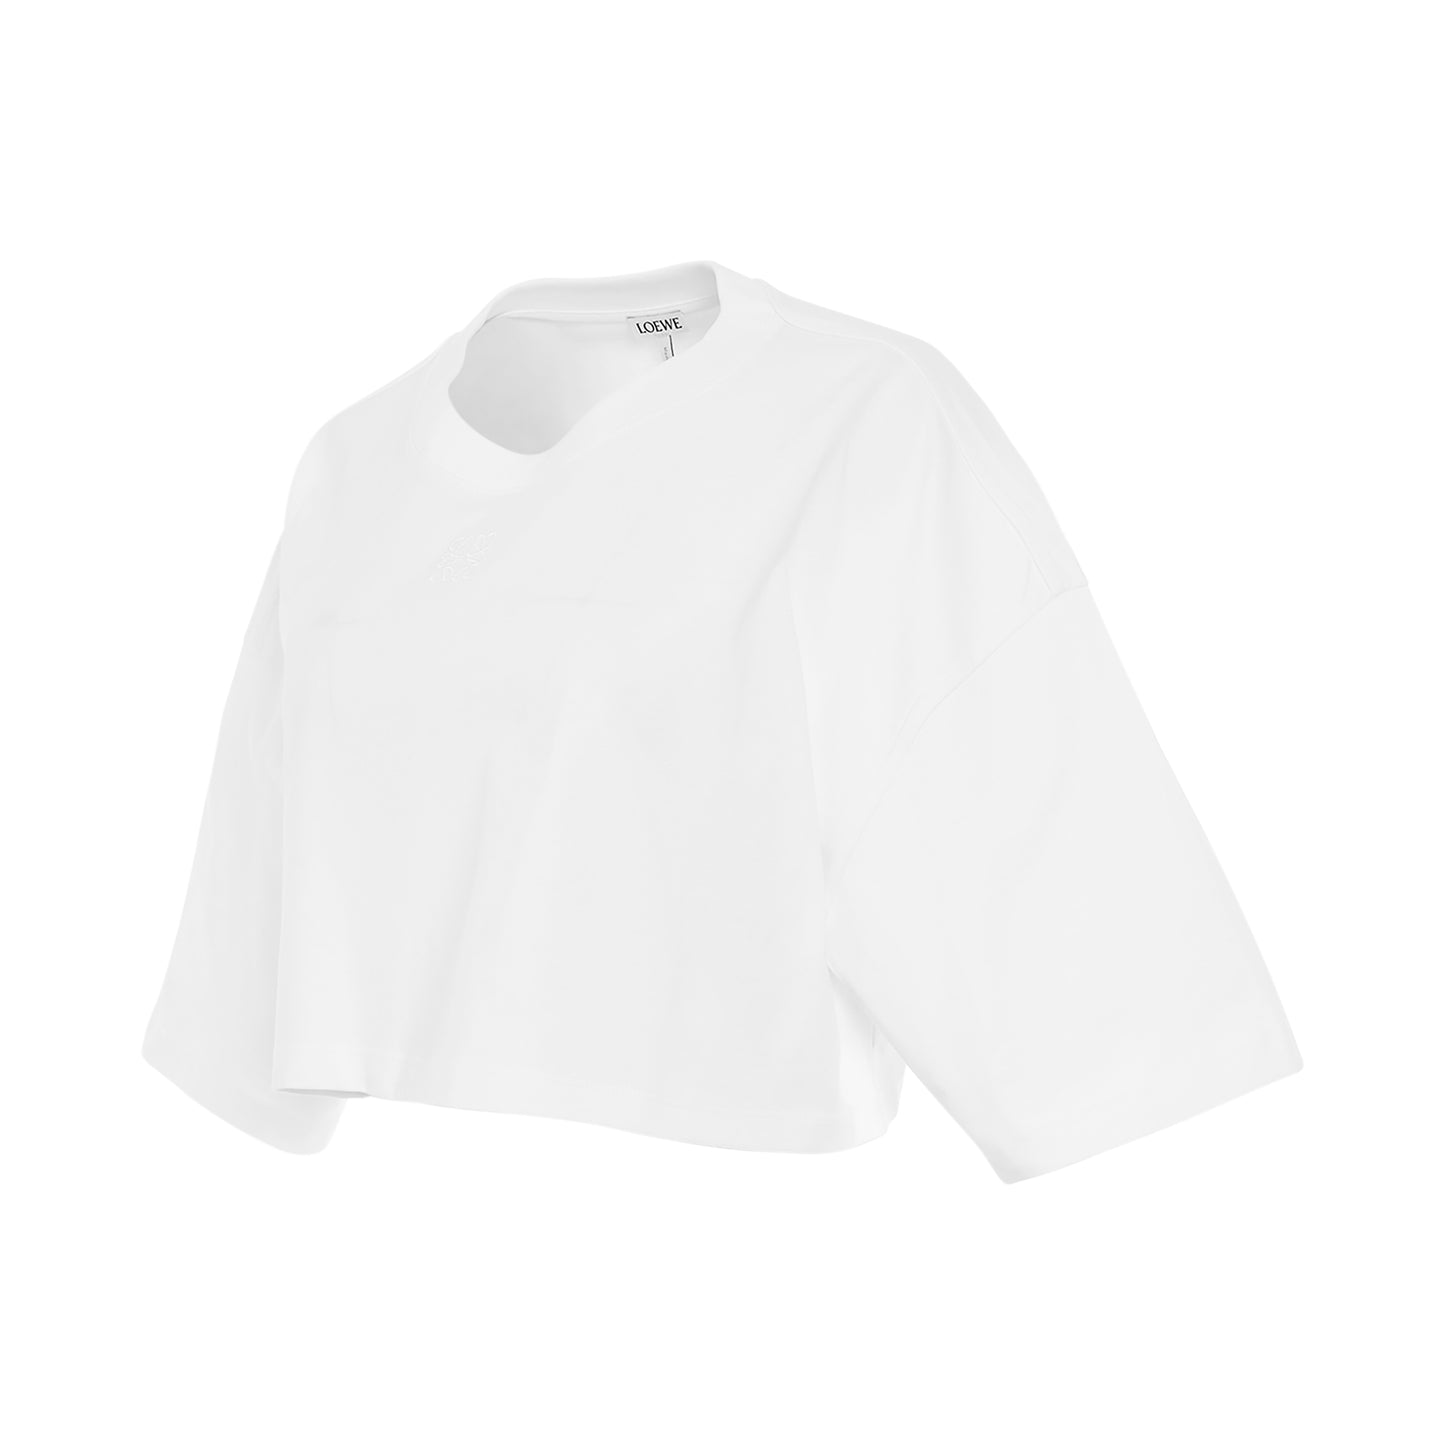 Anagram Cropped Cotton T-Shirt in White